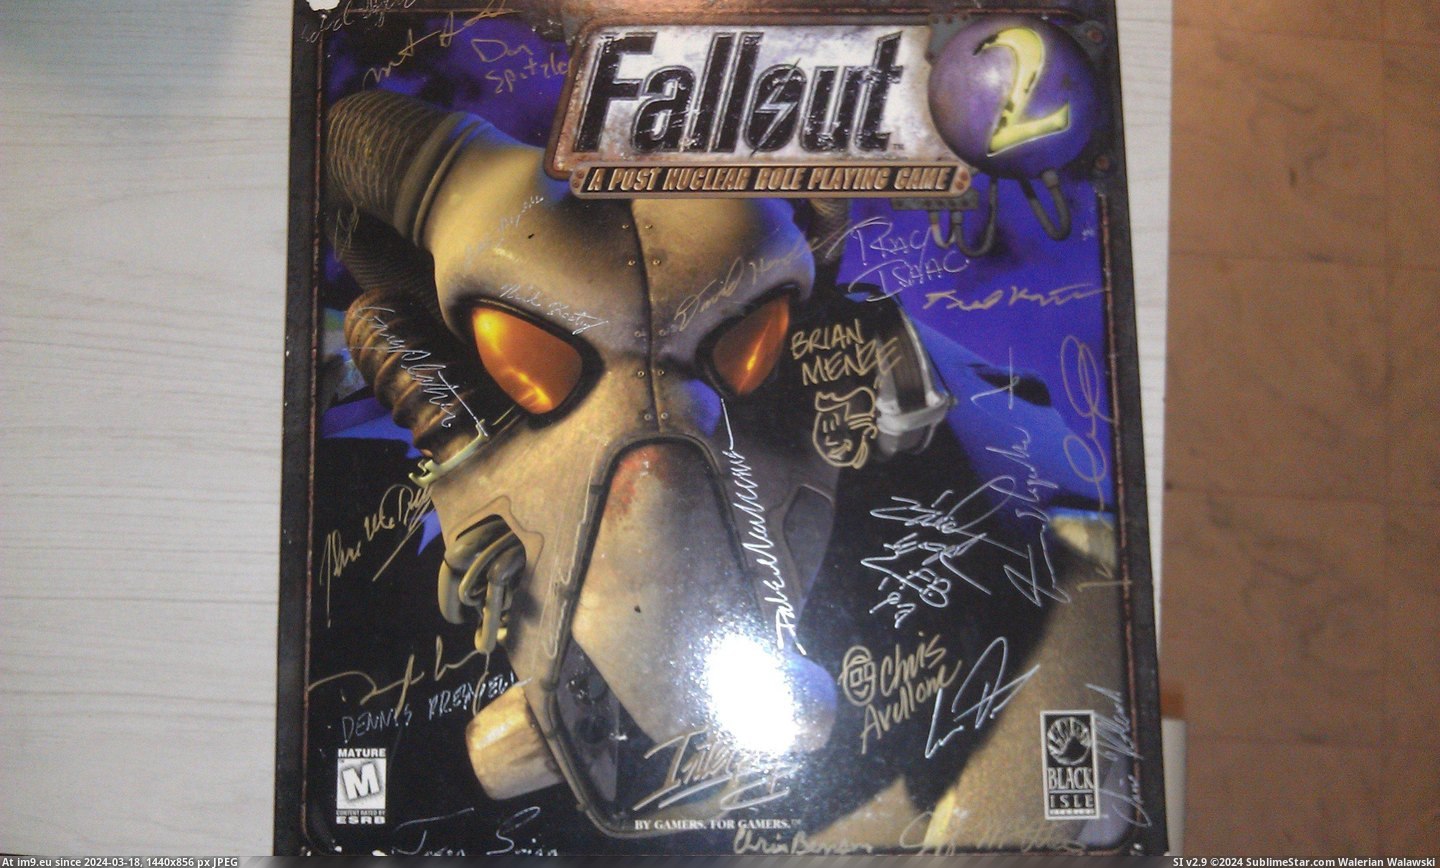 #Gaming #Out #Team #Contest #Development #Dug #Won #Fallout #Signed [Gaming] Dug this out. My copy of Fallout 2 signed by the development team that I won in a contest. Pic. (Image of album My r/GAMING favs))